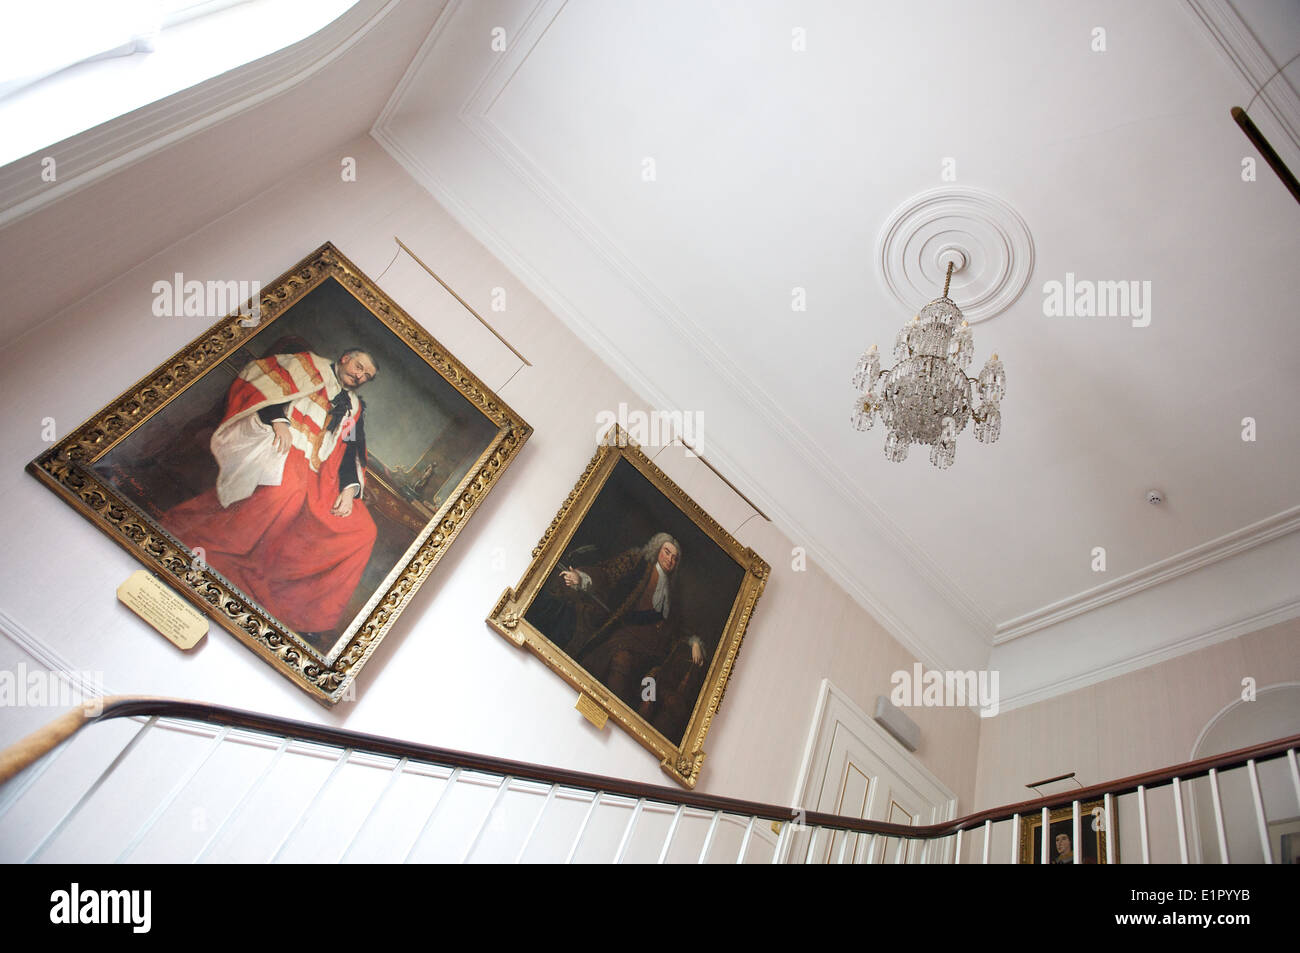 English country house interior stairs staircase with old master paintings on the walls Stock Photo